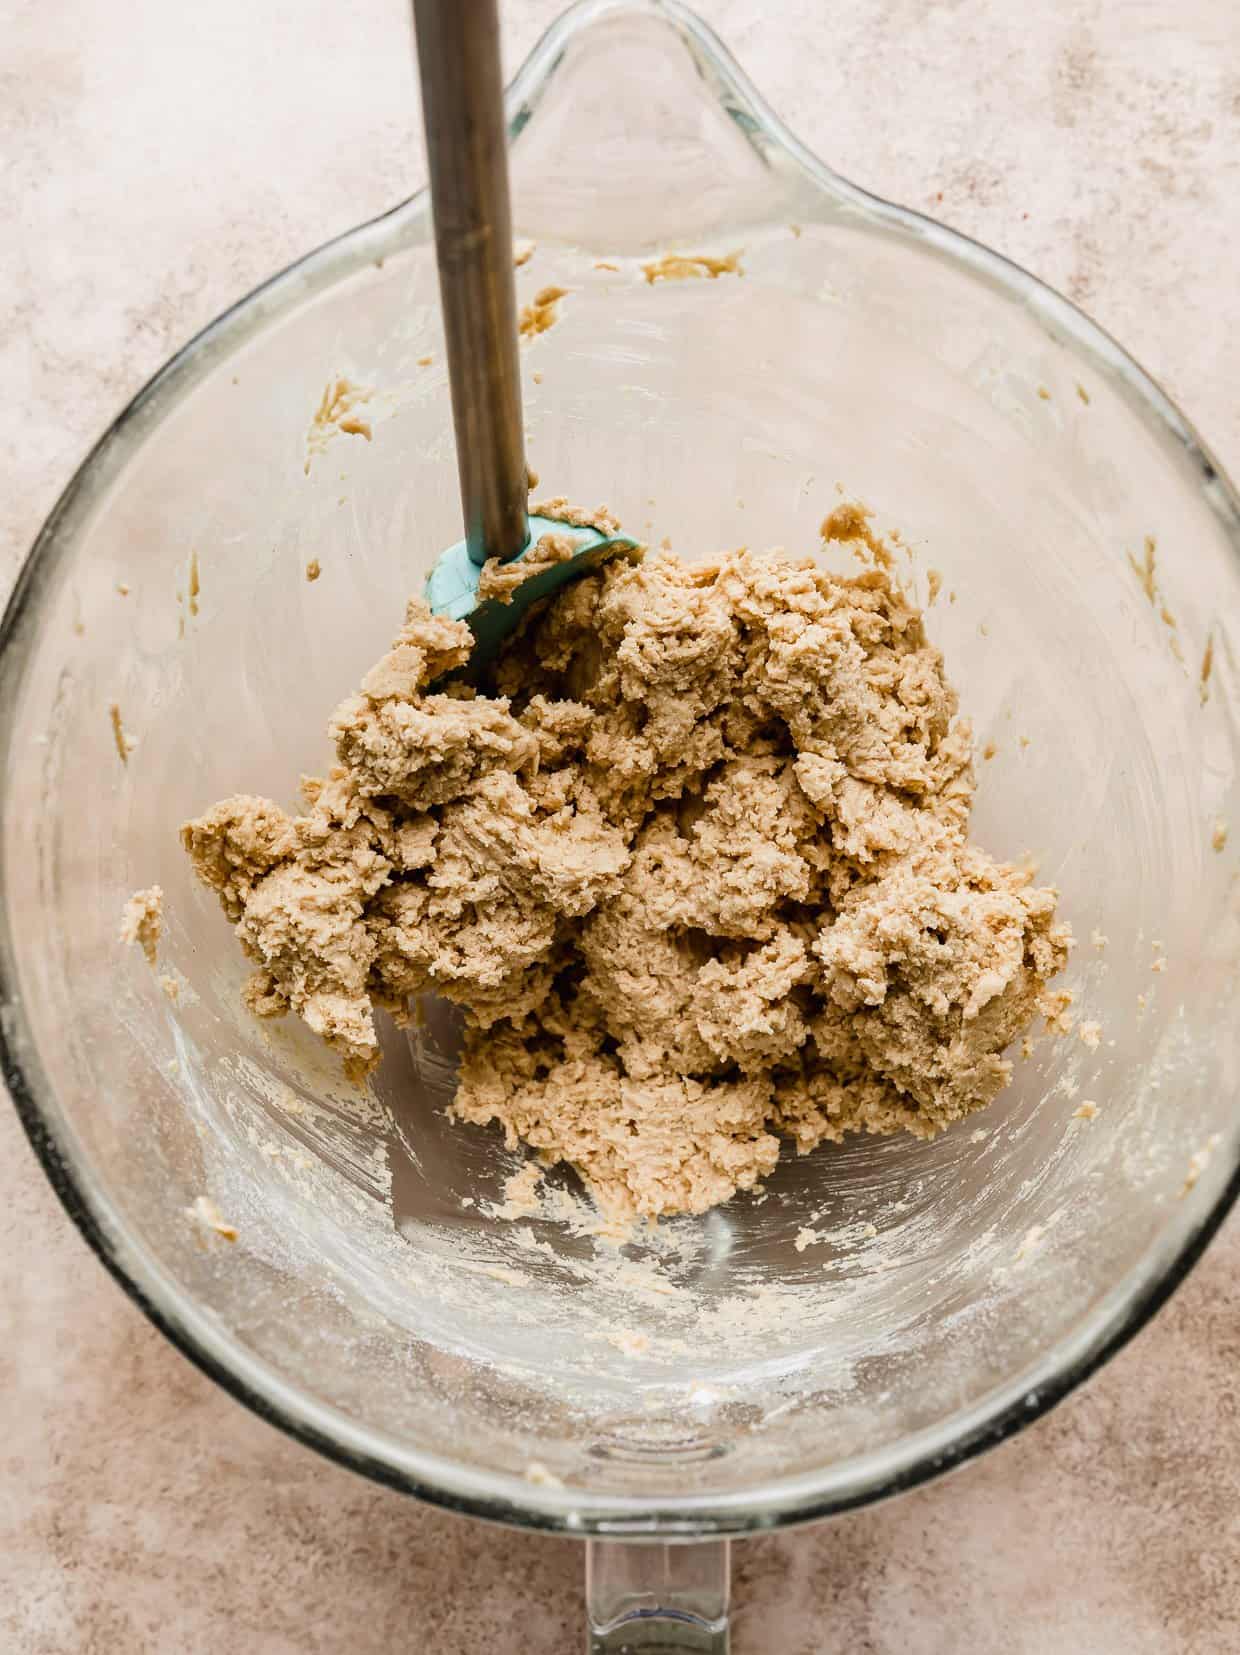 Peanut butter cookie dough in a glass mixing bowl on a light brown textured background.